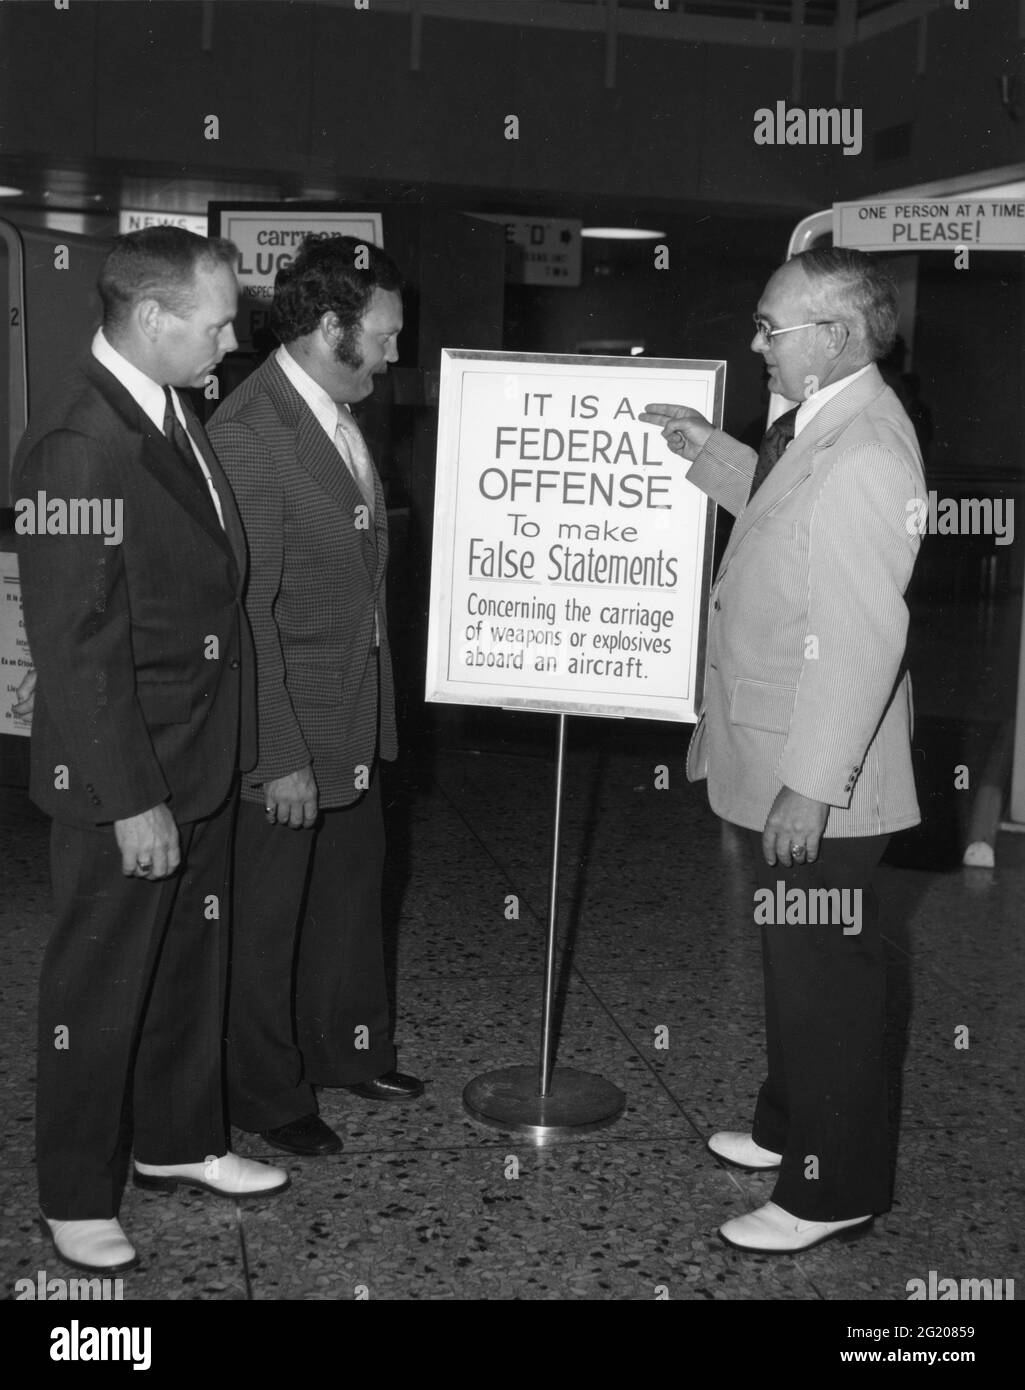 Airport officials view new signage warning passengers of penalties for making false statements regarding hijacking or carrying weapons aboard an aircraft, no location, 1970. (Photo by Federal Aviation Administration/RBM Vintage Images) Stock Photo